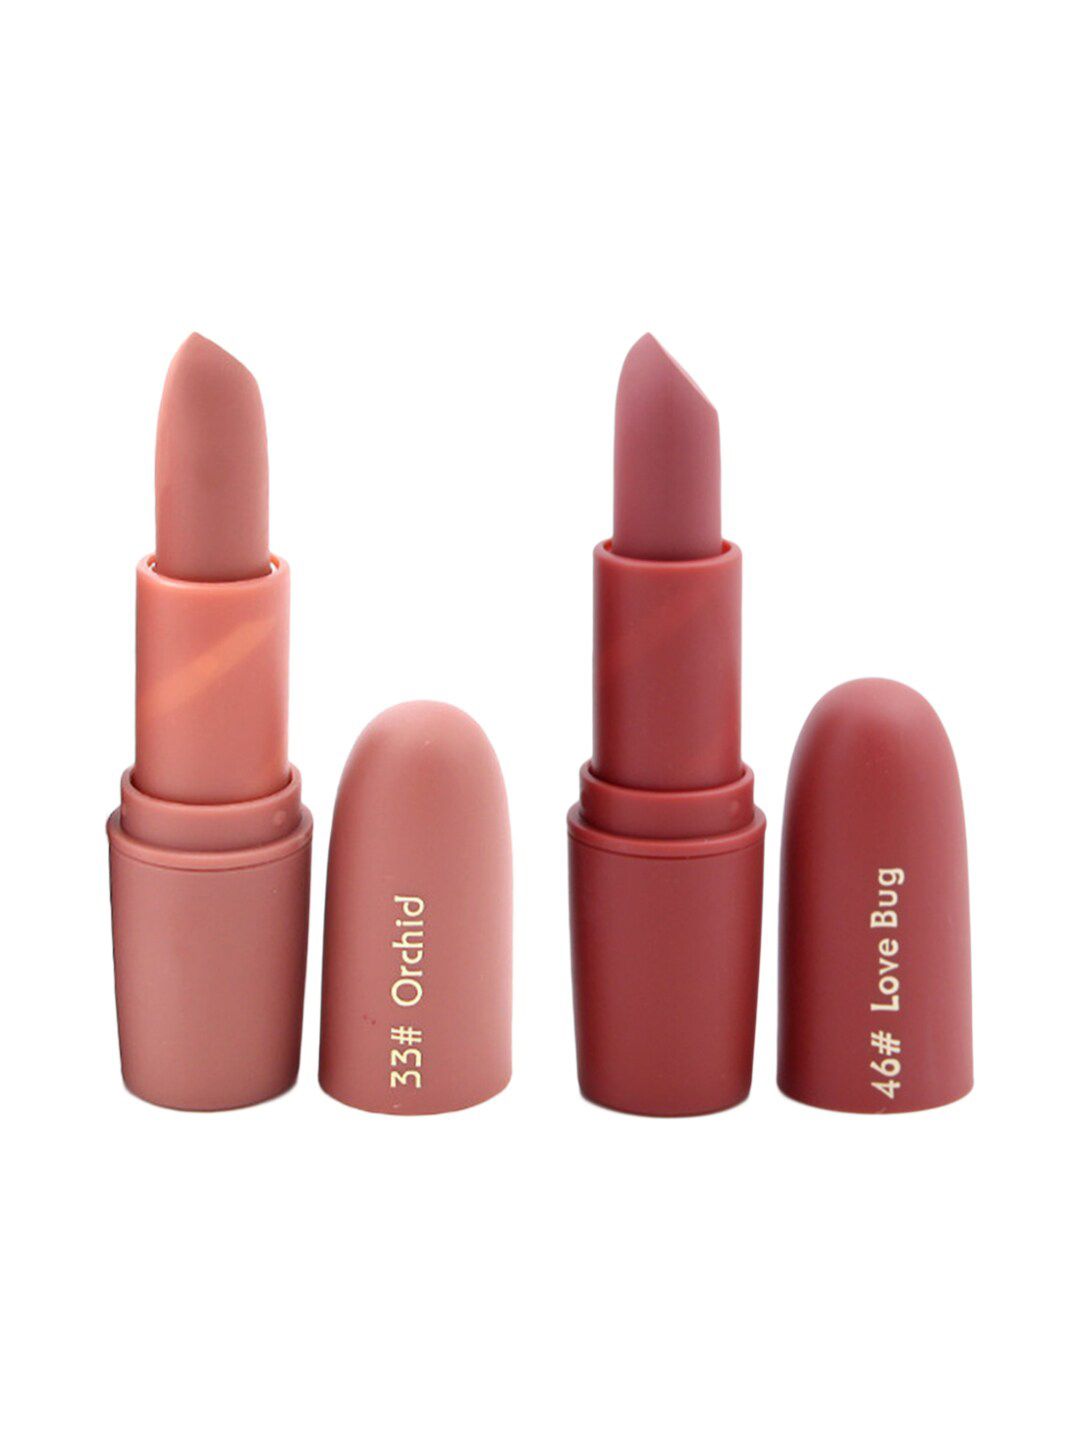 MISS ROSE Professional Make-Up Set of 2 Matte Creamy Lipsticks - Orchid 33 & Love Bug 46 Price in India